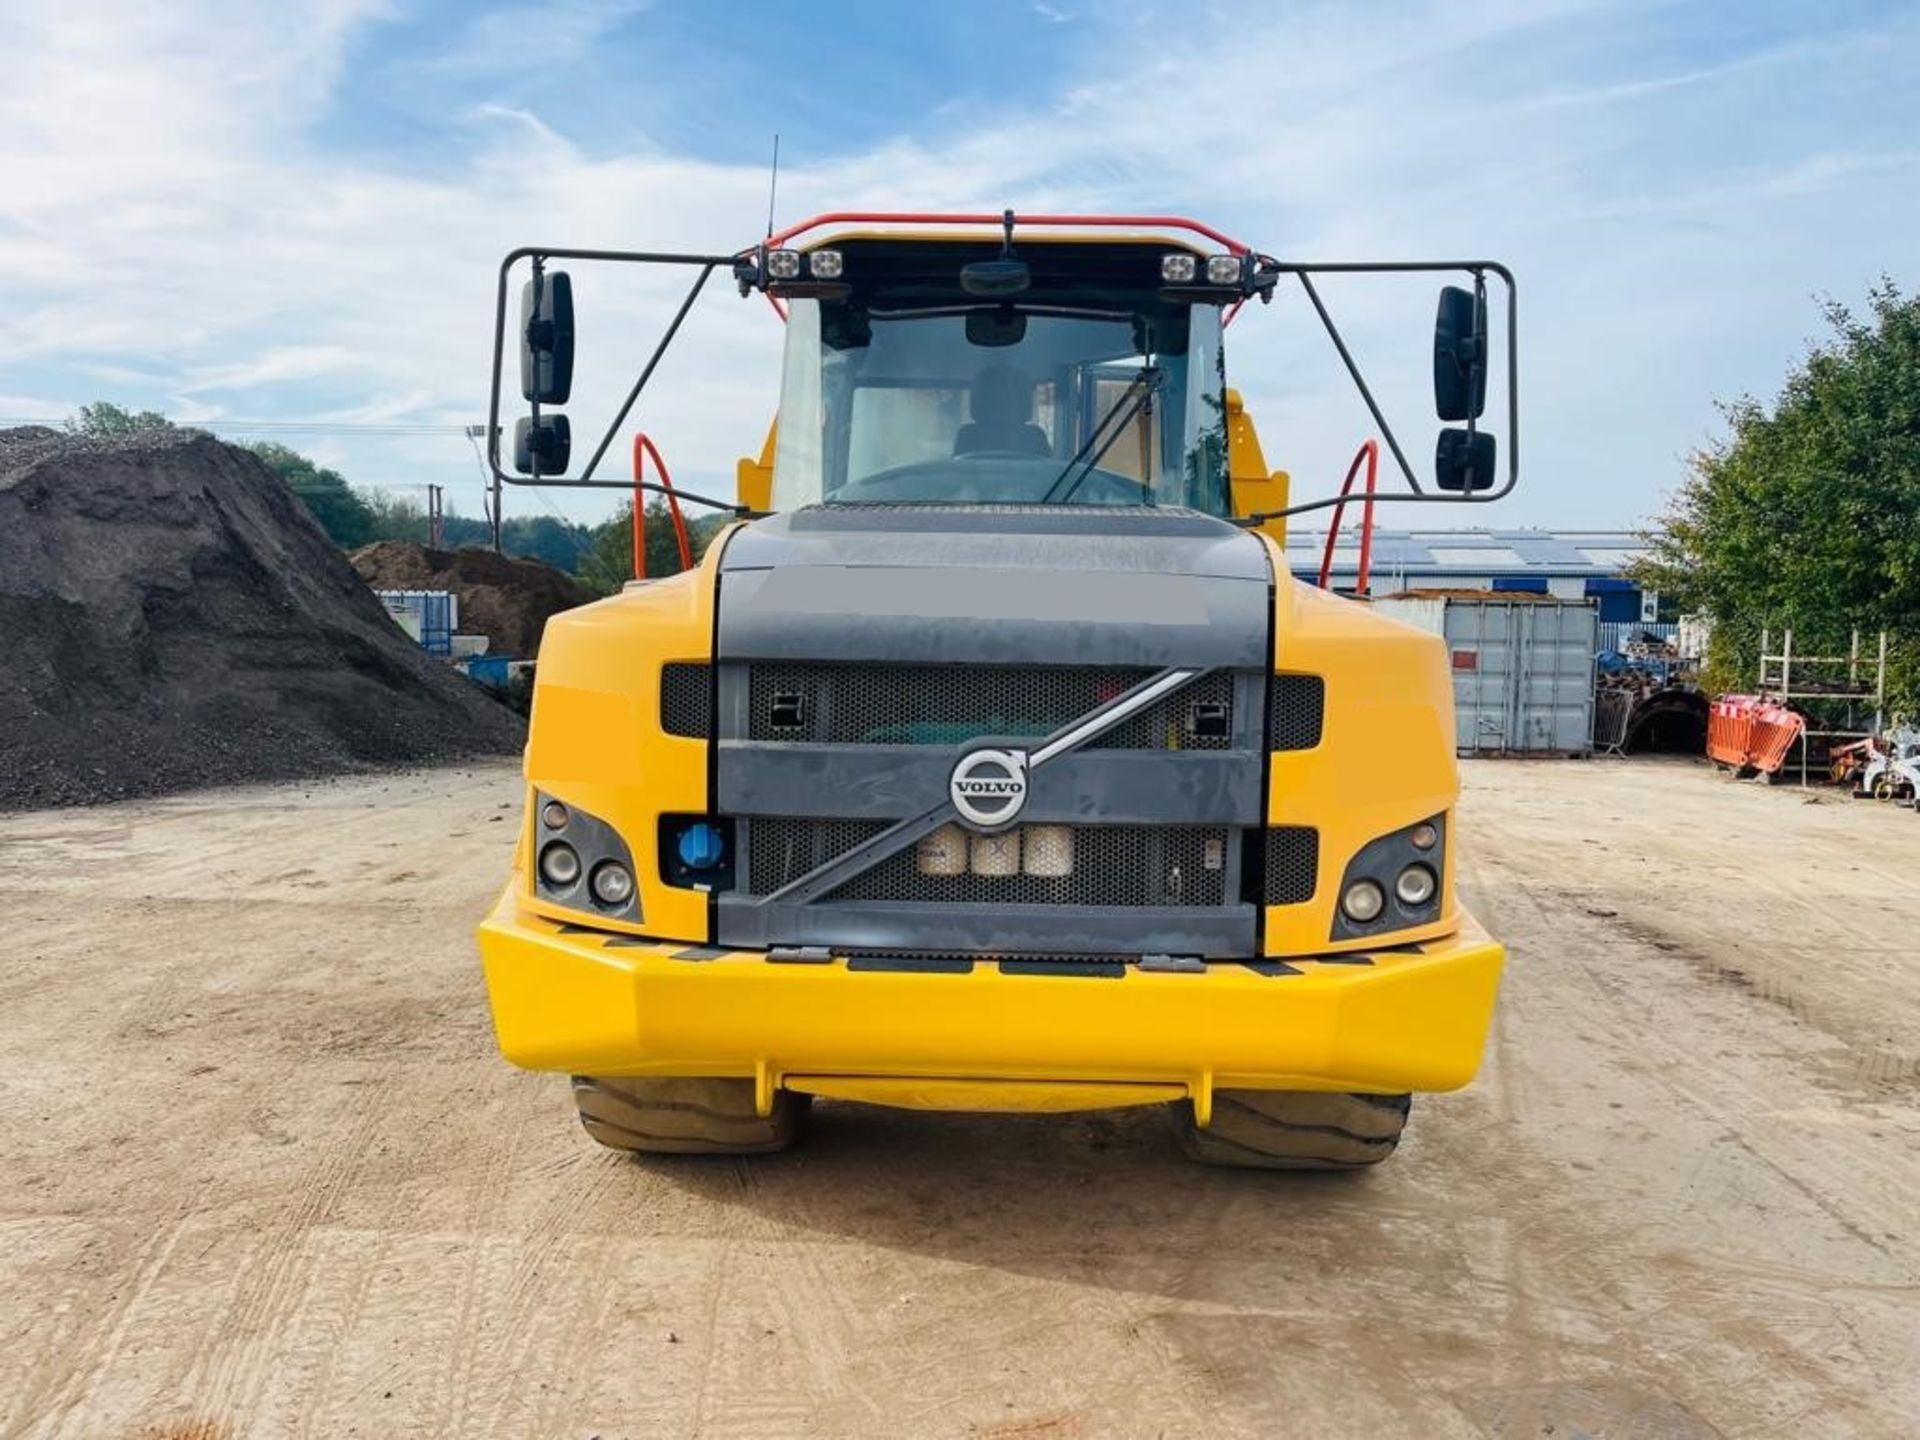 2021 - VOLVO A 30 G DUMP TRUCK - Image 11 of 20